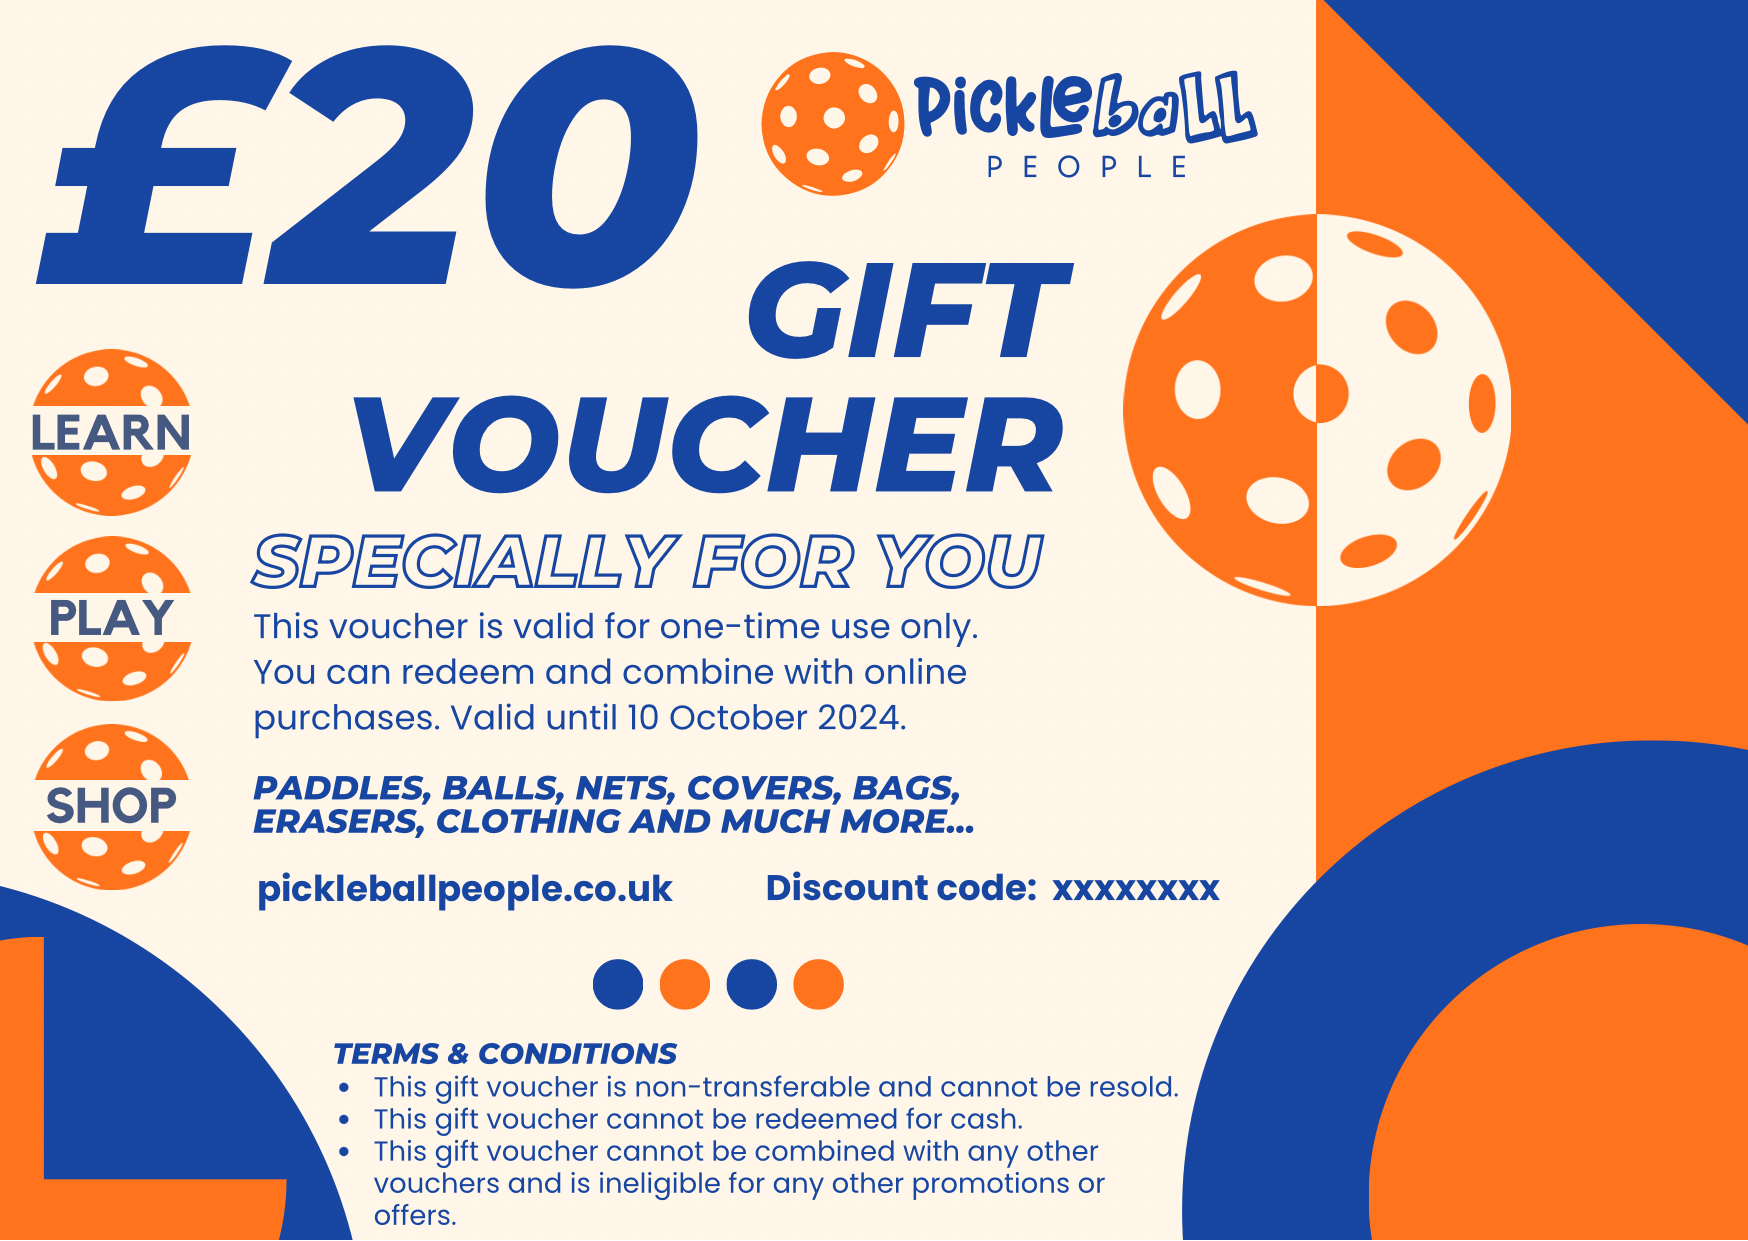 Featured image for “Pickleball People £20 - Gift Voucher”